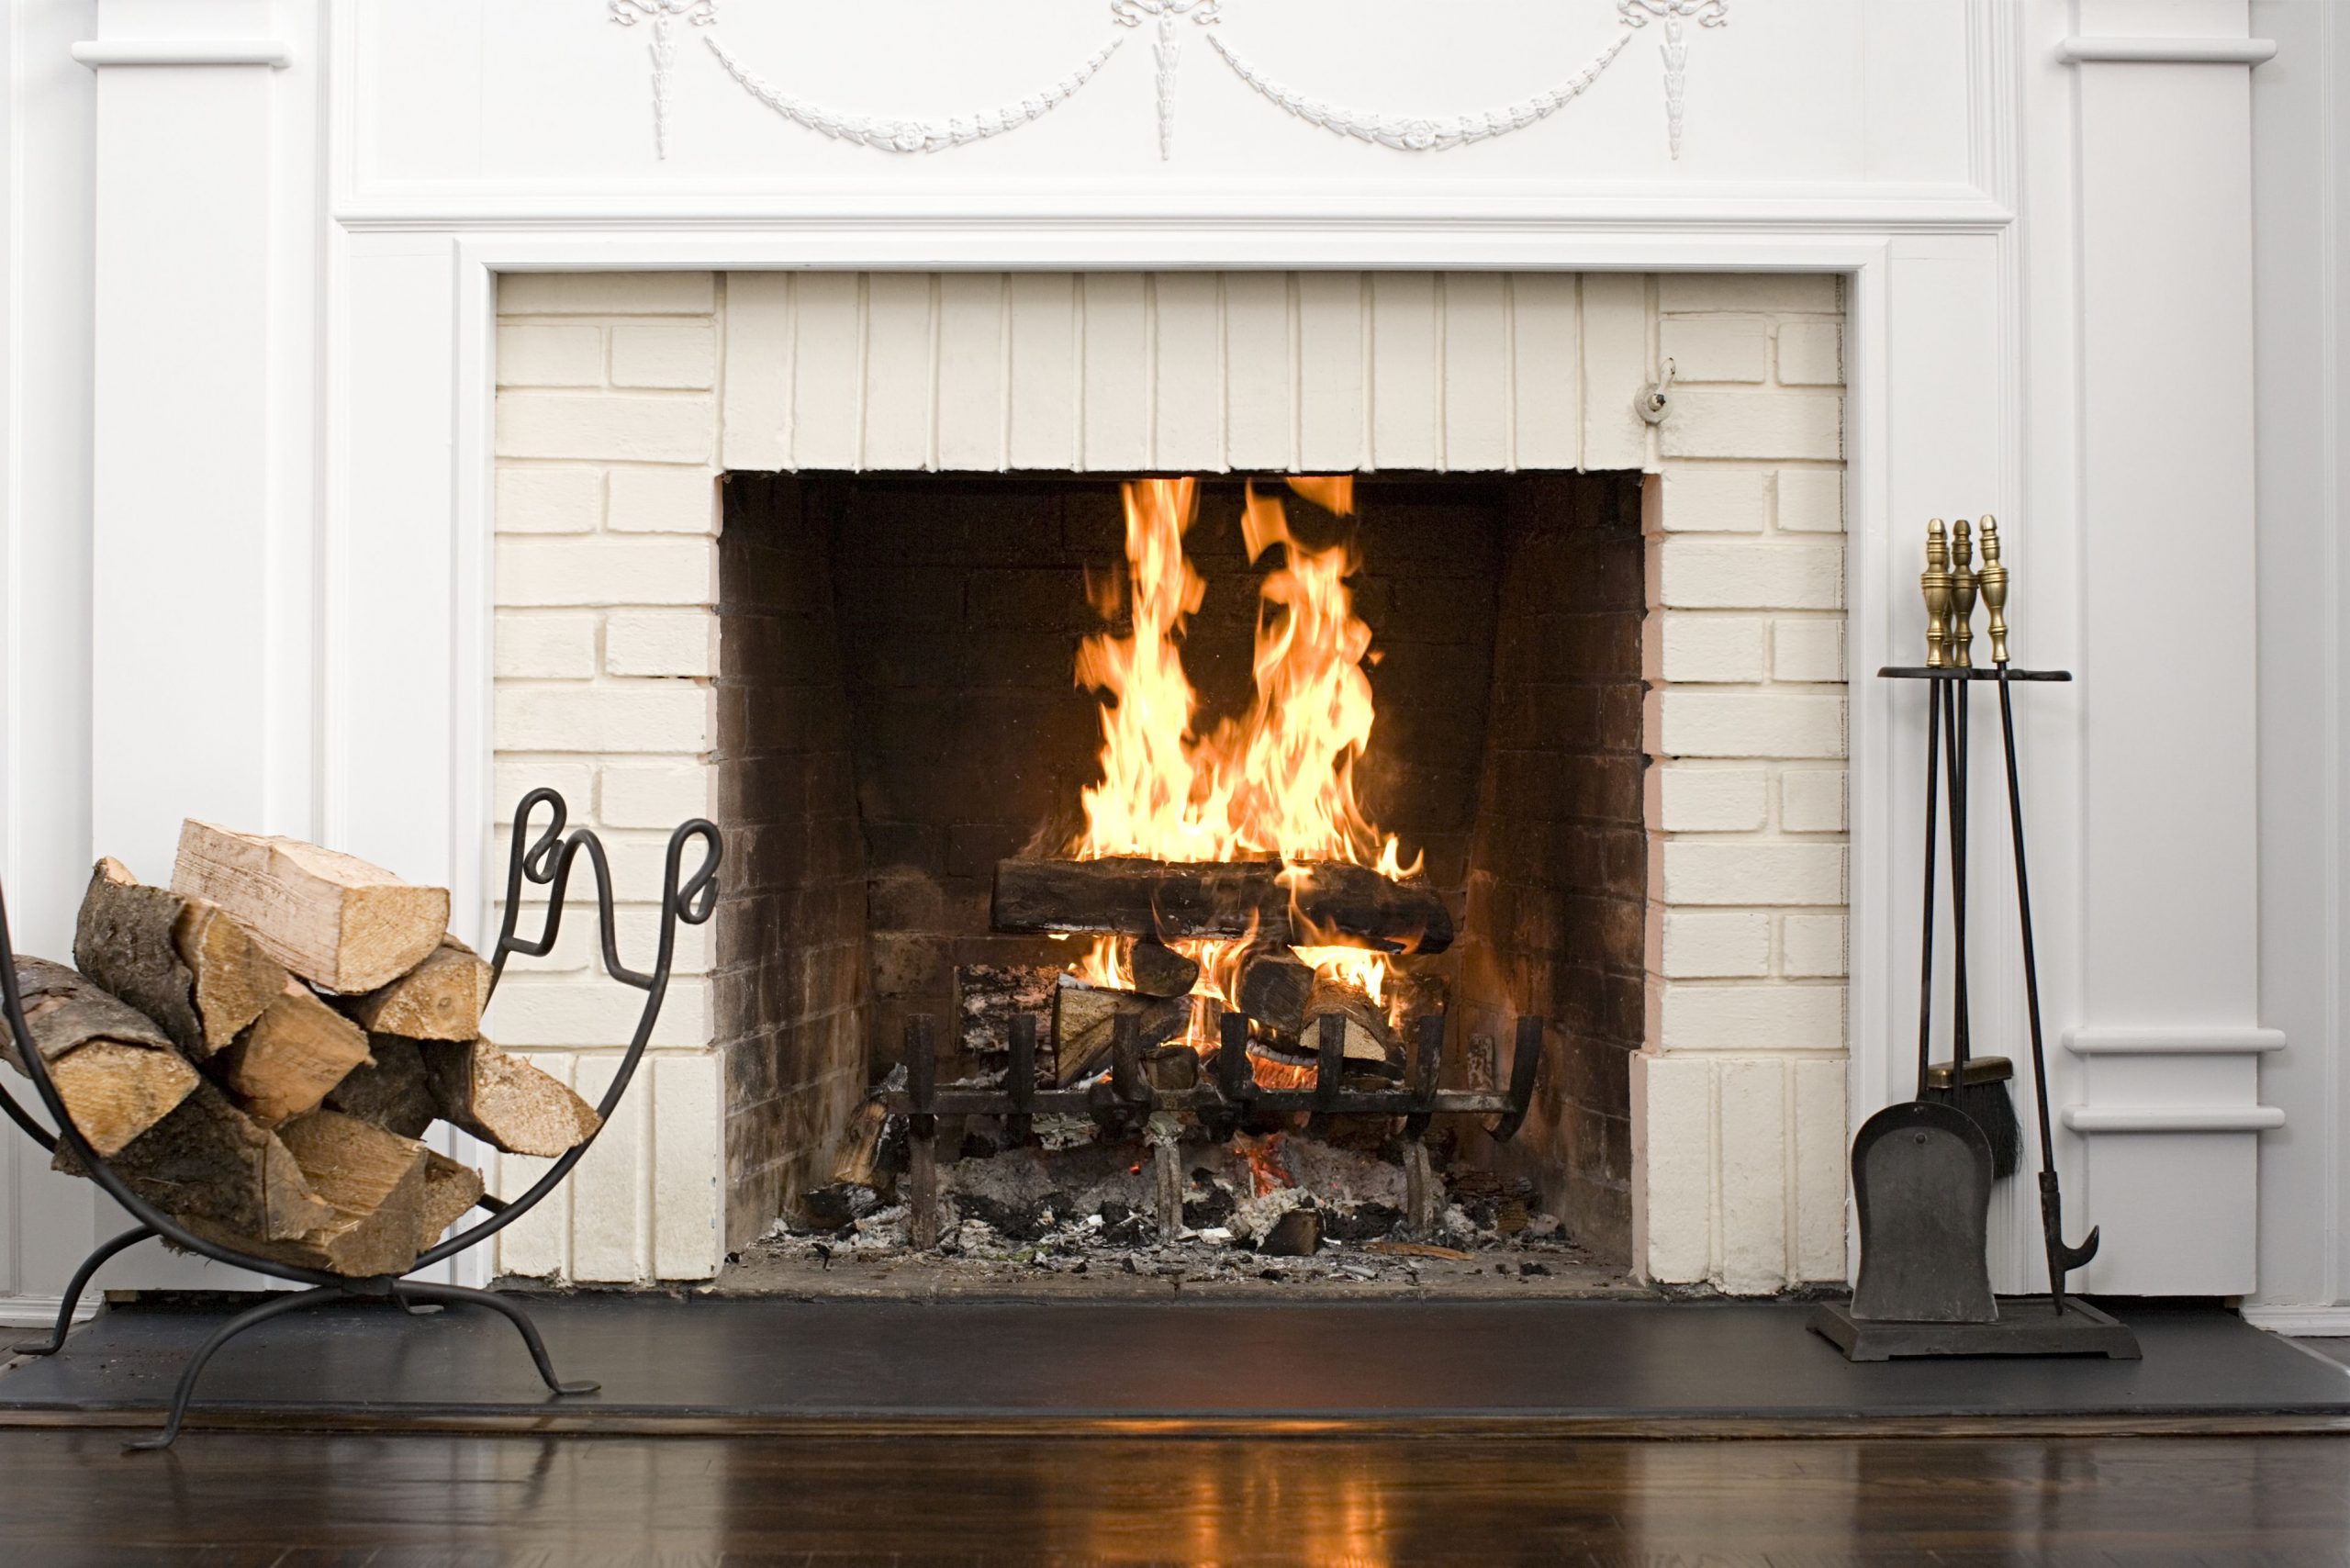 Learn How to Start a Fire in a Fireplace